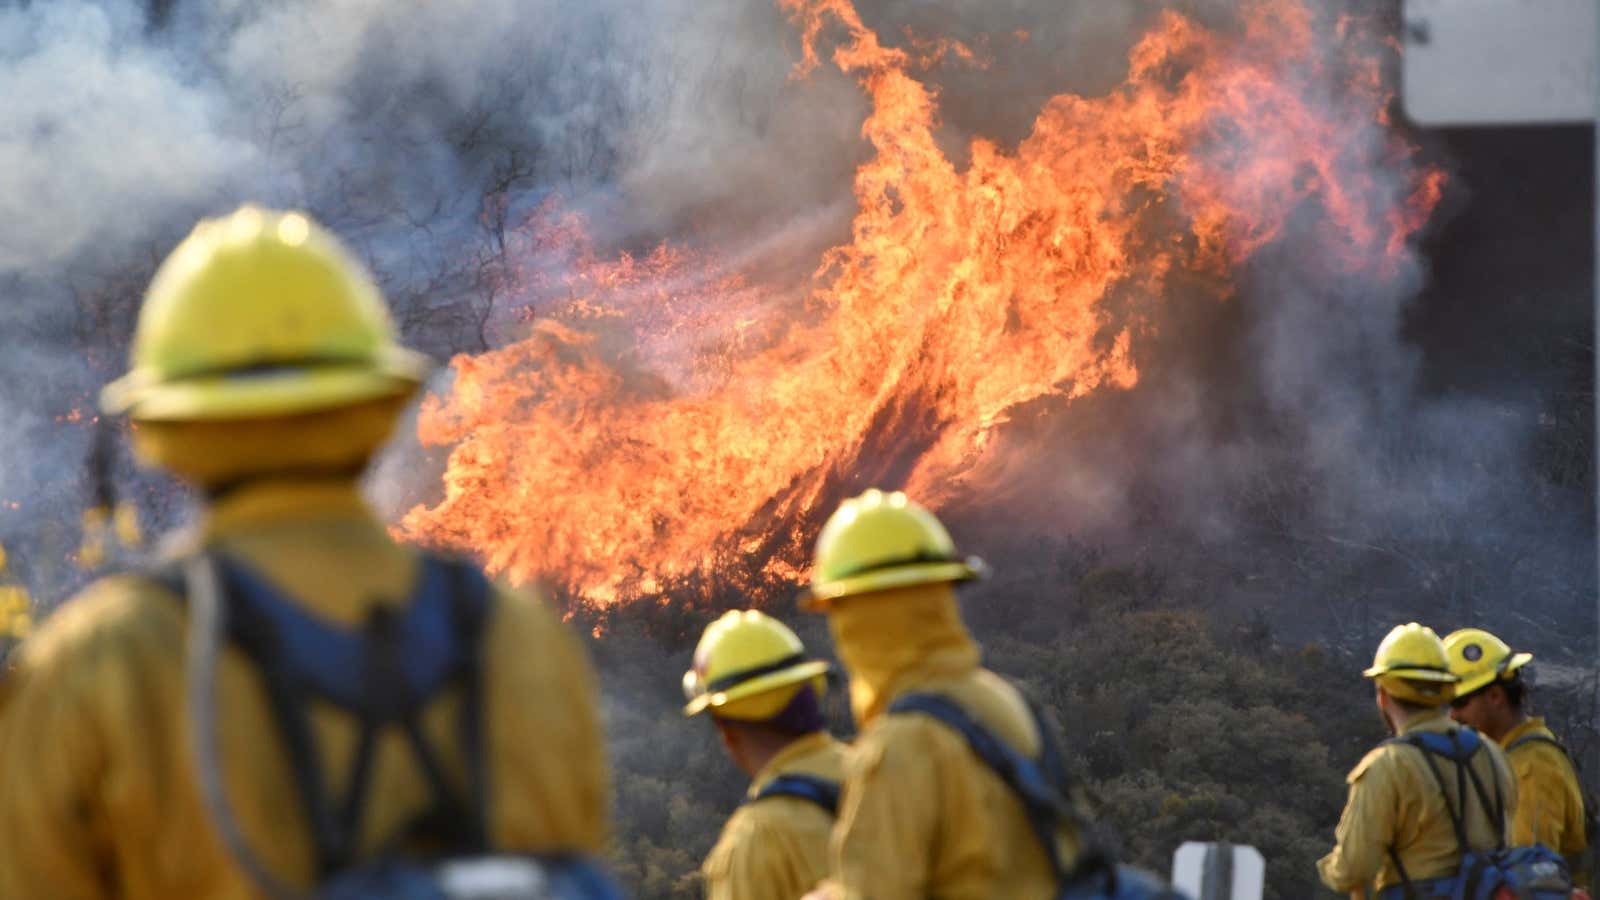 Can open-source data help keep firefighters safe?